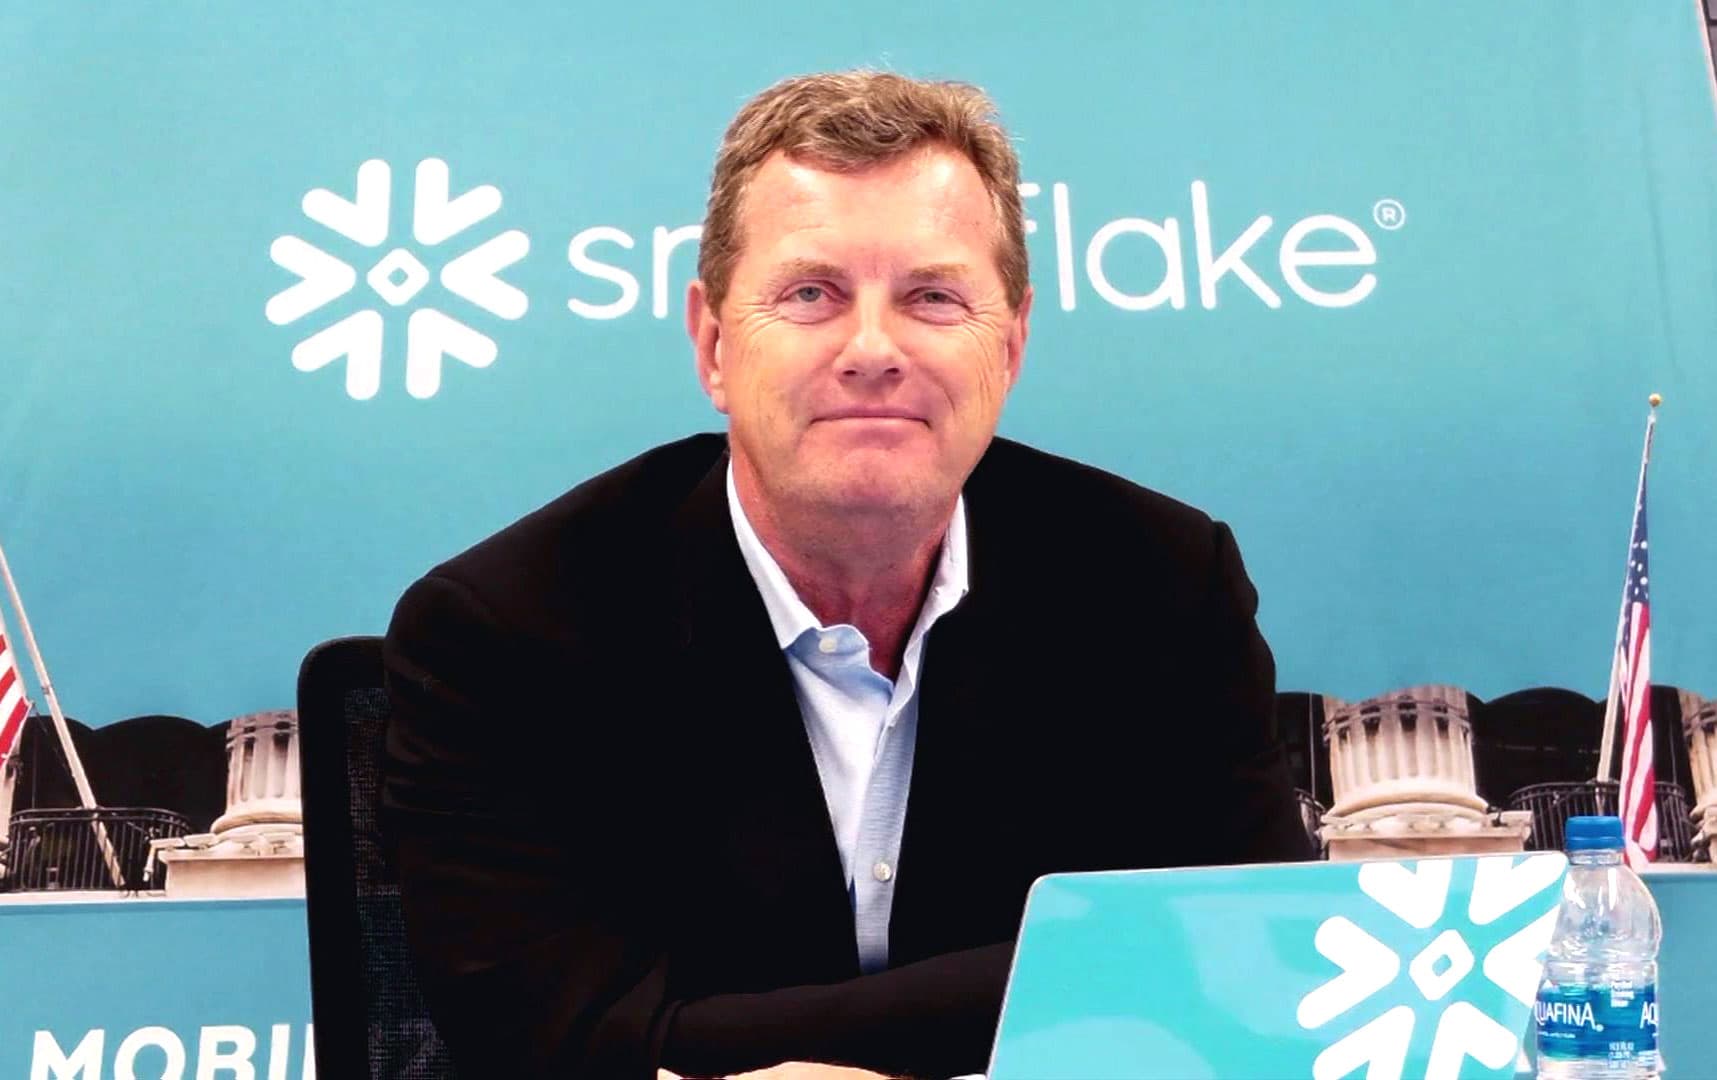 Snowflake CEO: Projecting revenue is challenging, so we prefer to give conservative guidance